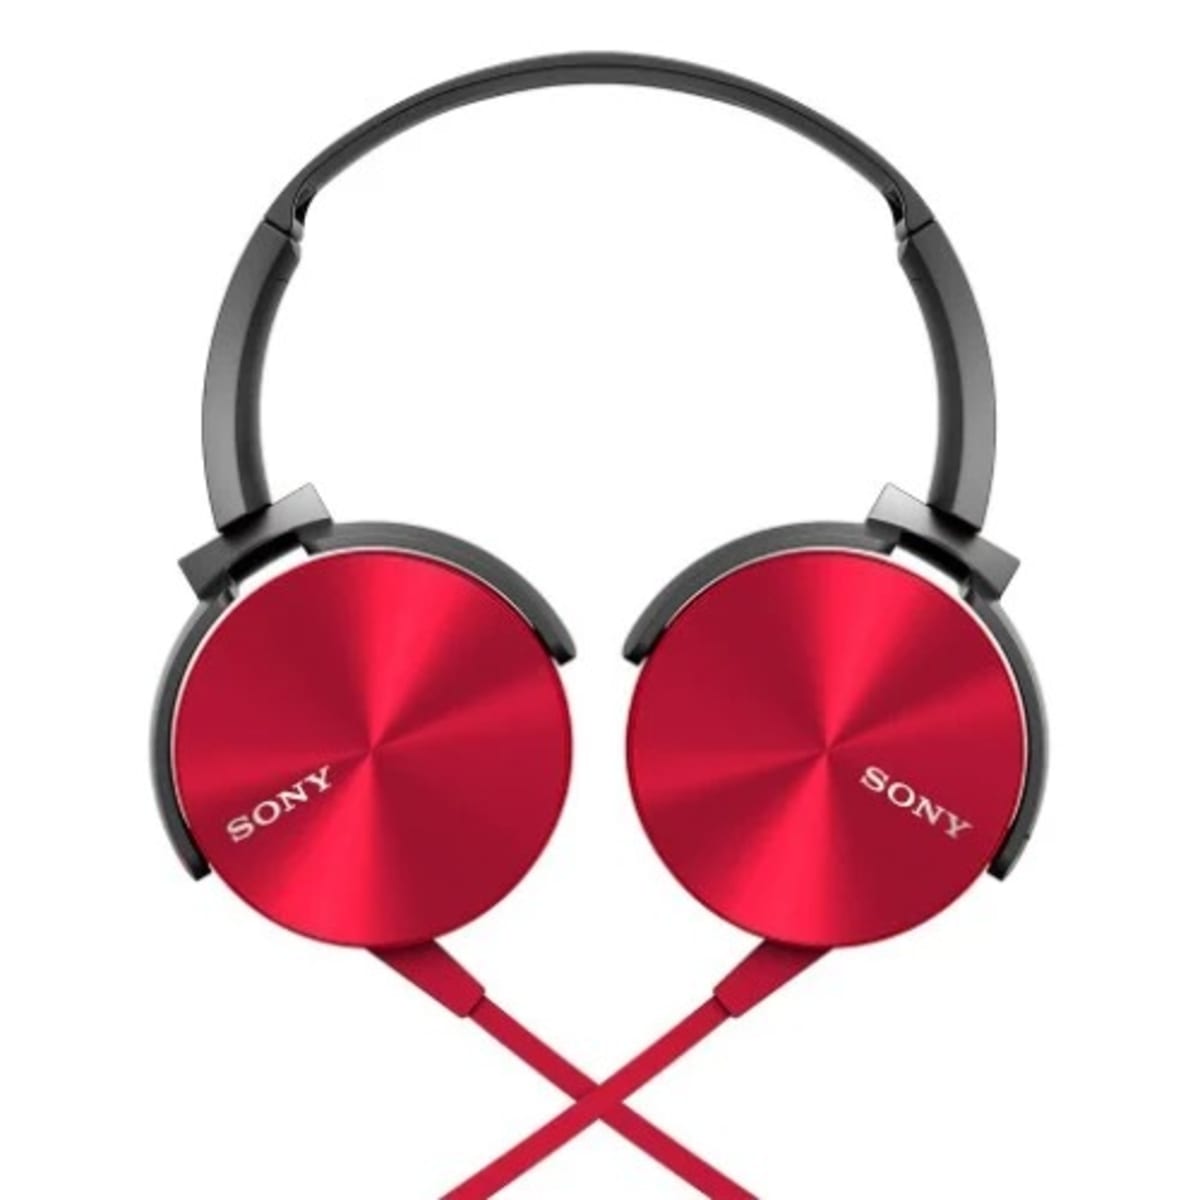 Sony On-ear Extra Bass Headphones With Mic - Red